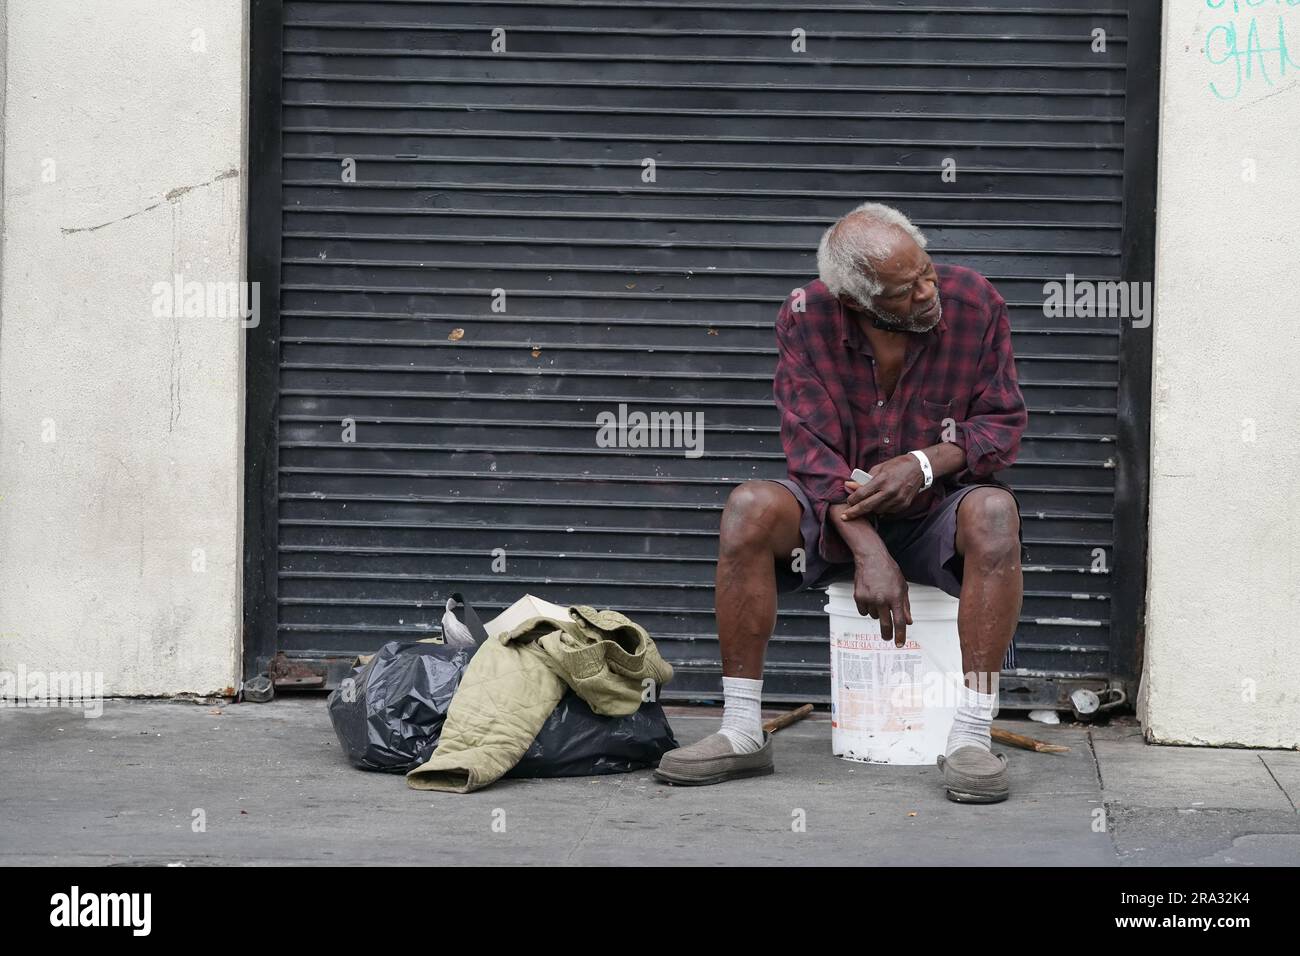 Scenes from Skid Row an area of Downtown Los Angeles which is one of the largest stable populations (between 5,000 and 8,000) of homeless people. Stock Photo